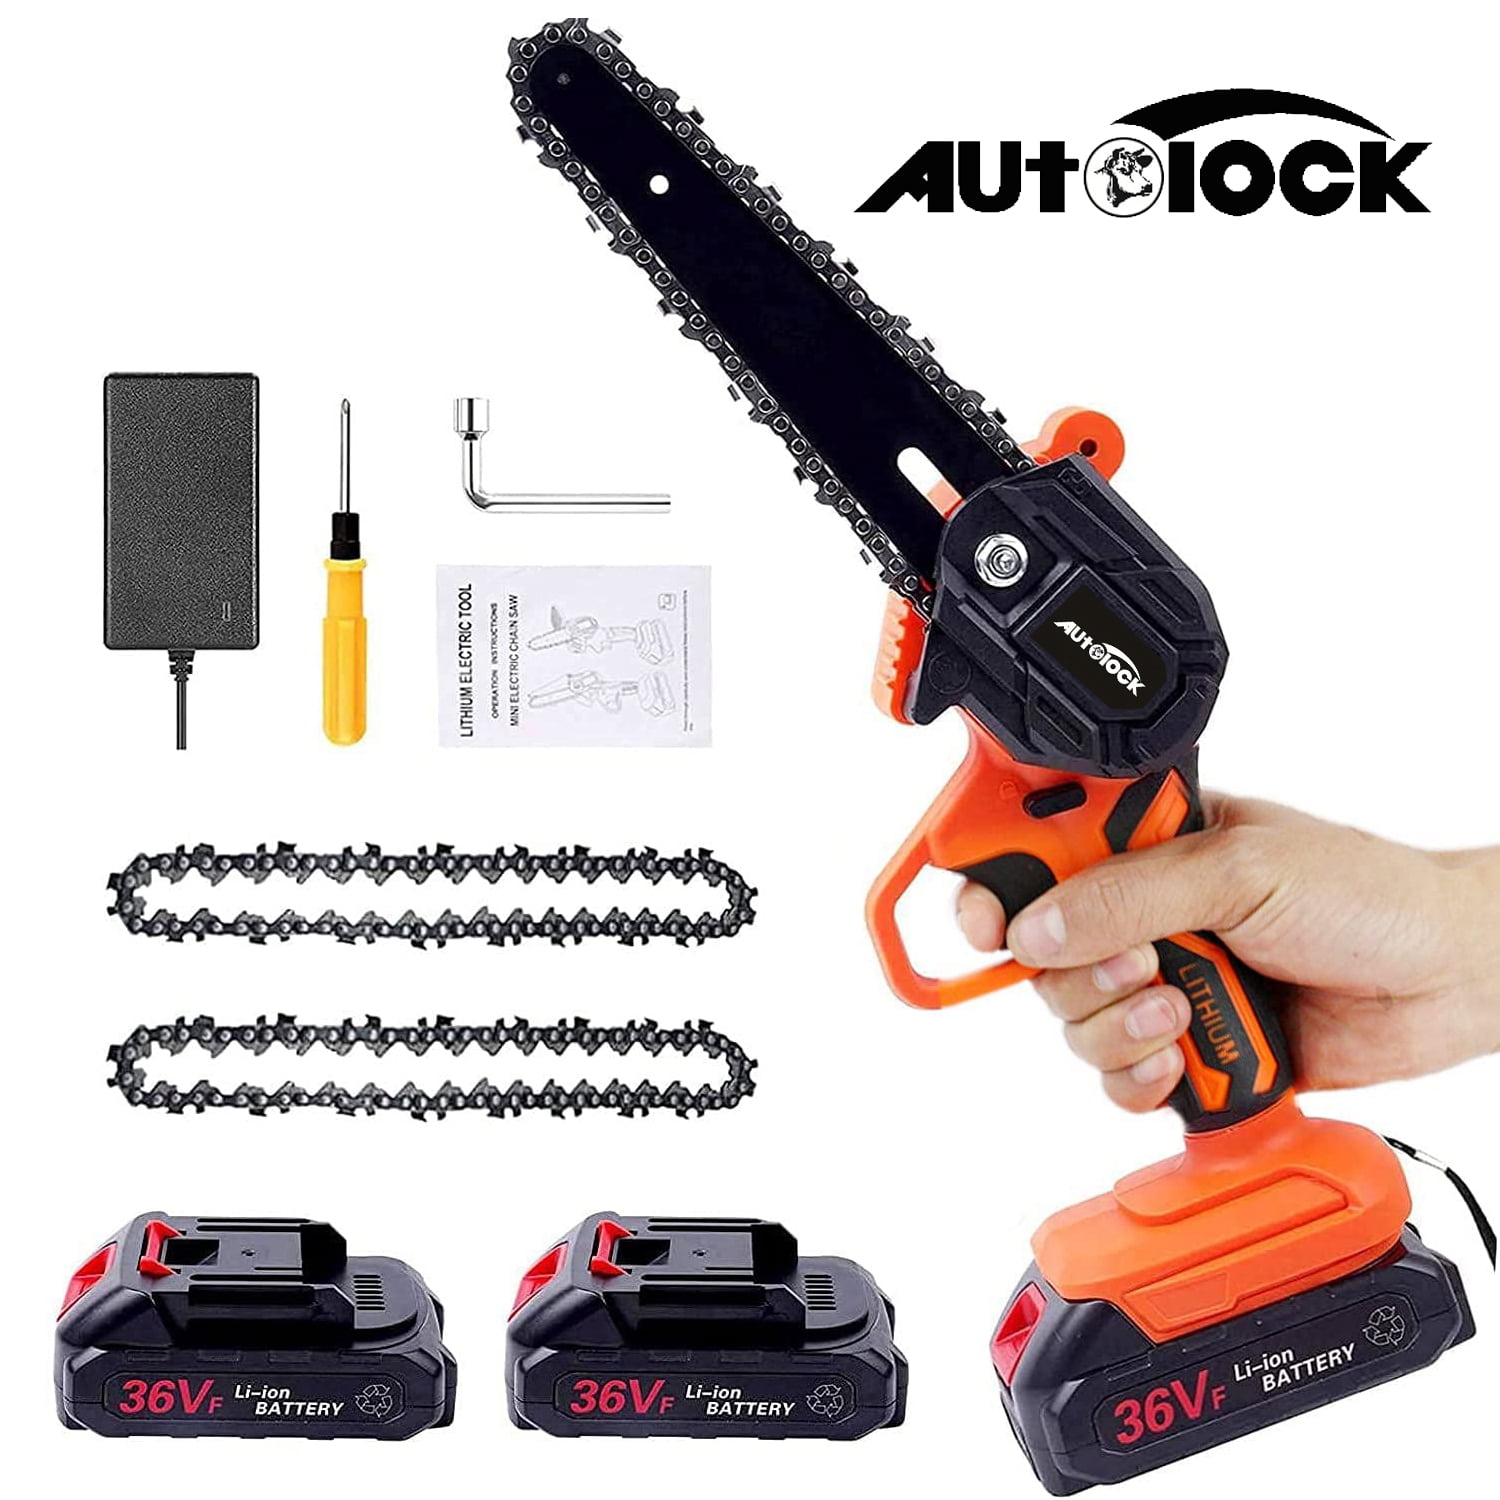 Garden Pruning Mini Chainsaw Cordless Chainsaw Tree Trimming Electric Chainsaw 2 Battery 2 Chain 1 Bag Mini Chainsaw Cordless for Branch Wood Cutting Mini Chainsaw 6 Inch 